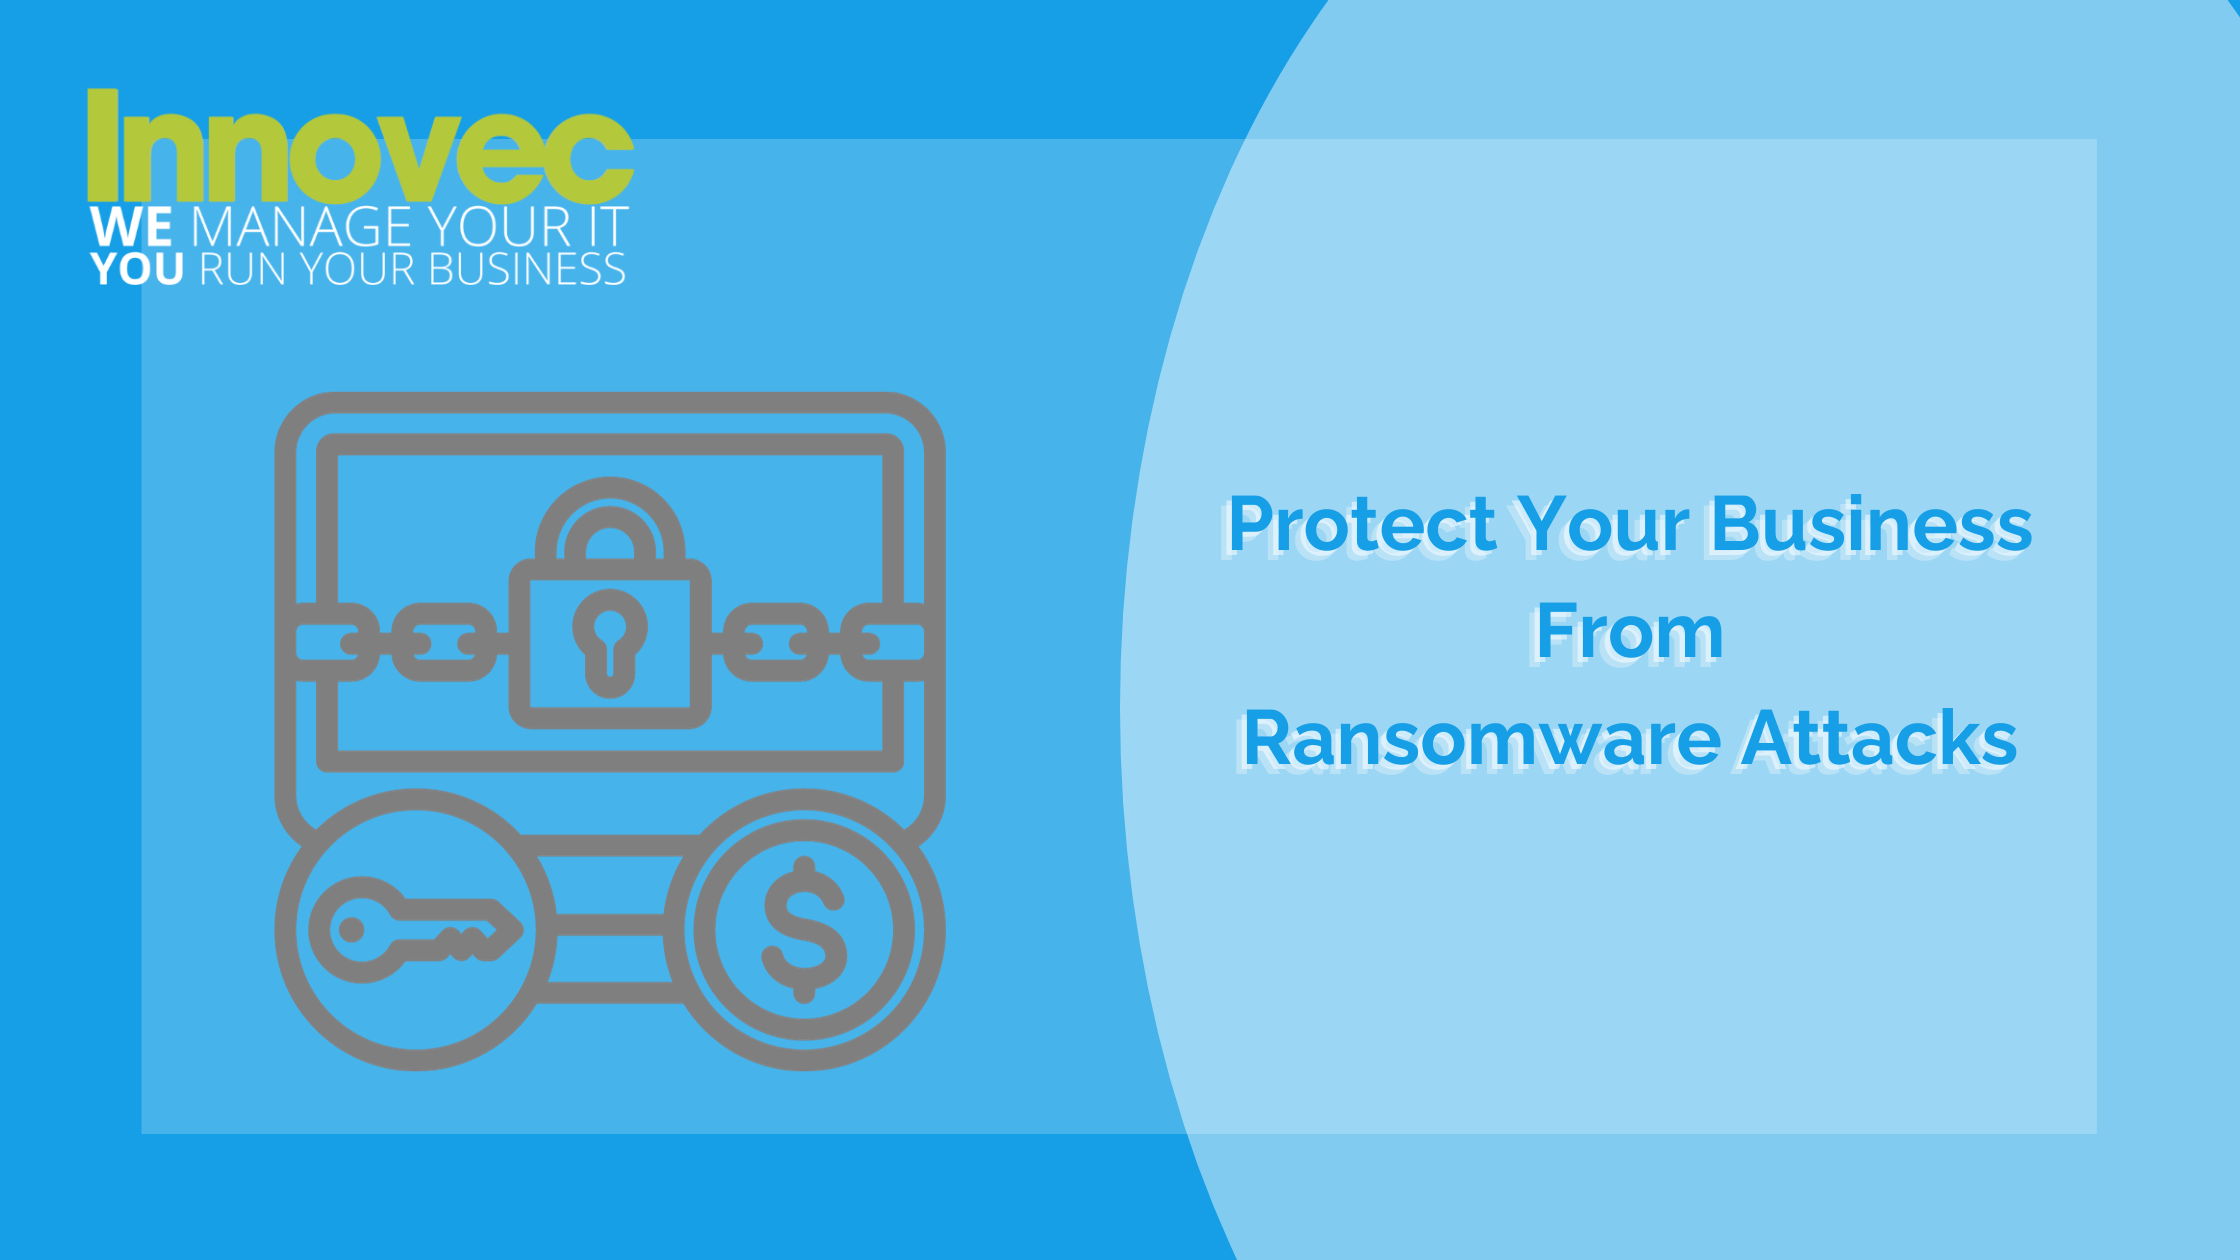 How to protect your business from Ransomware Attacks